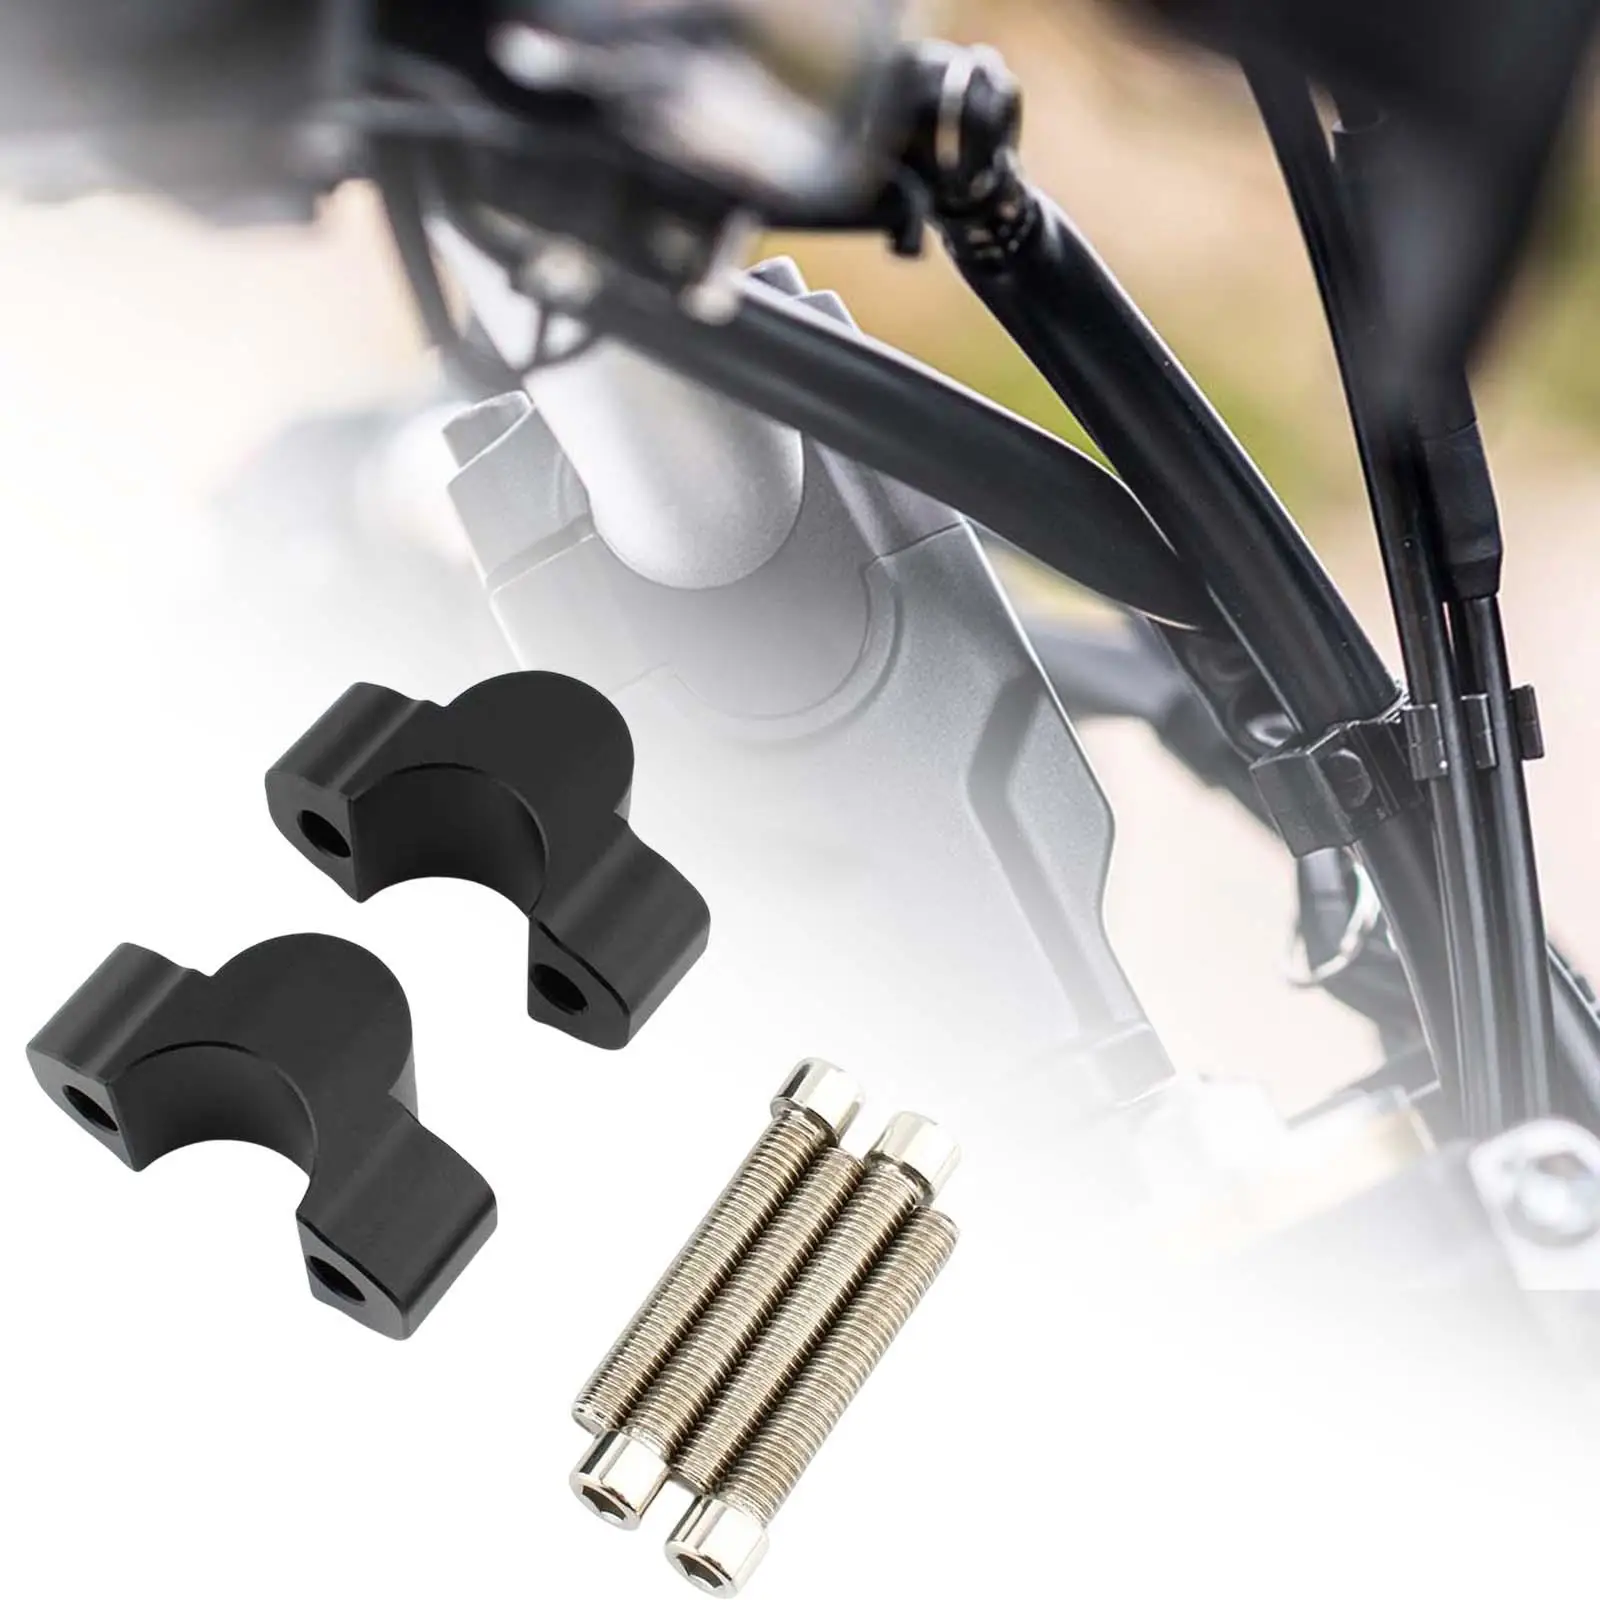 Handlebar Mount Clamp Aluminum Alloy Fit for Tenere 700 XT700 Replace